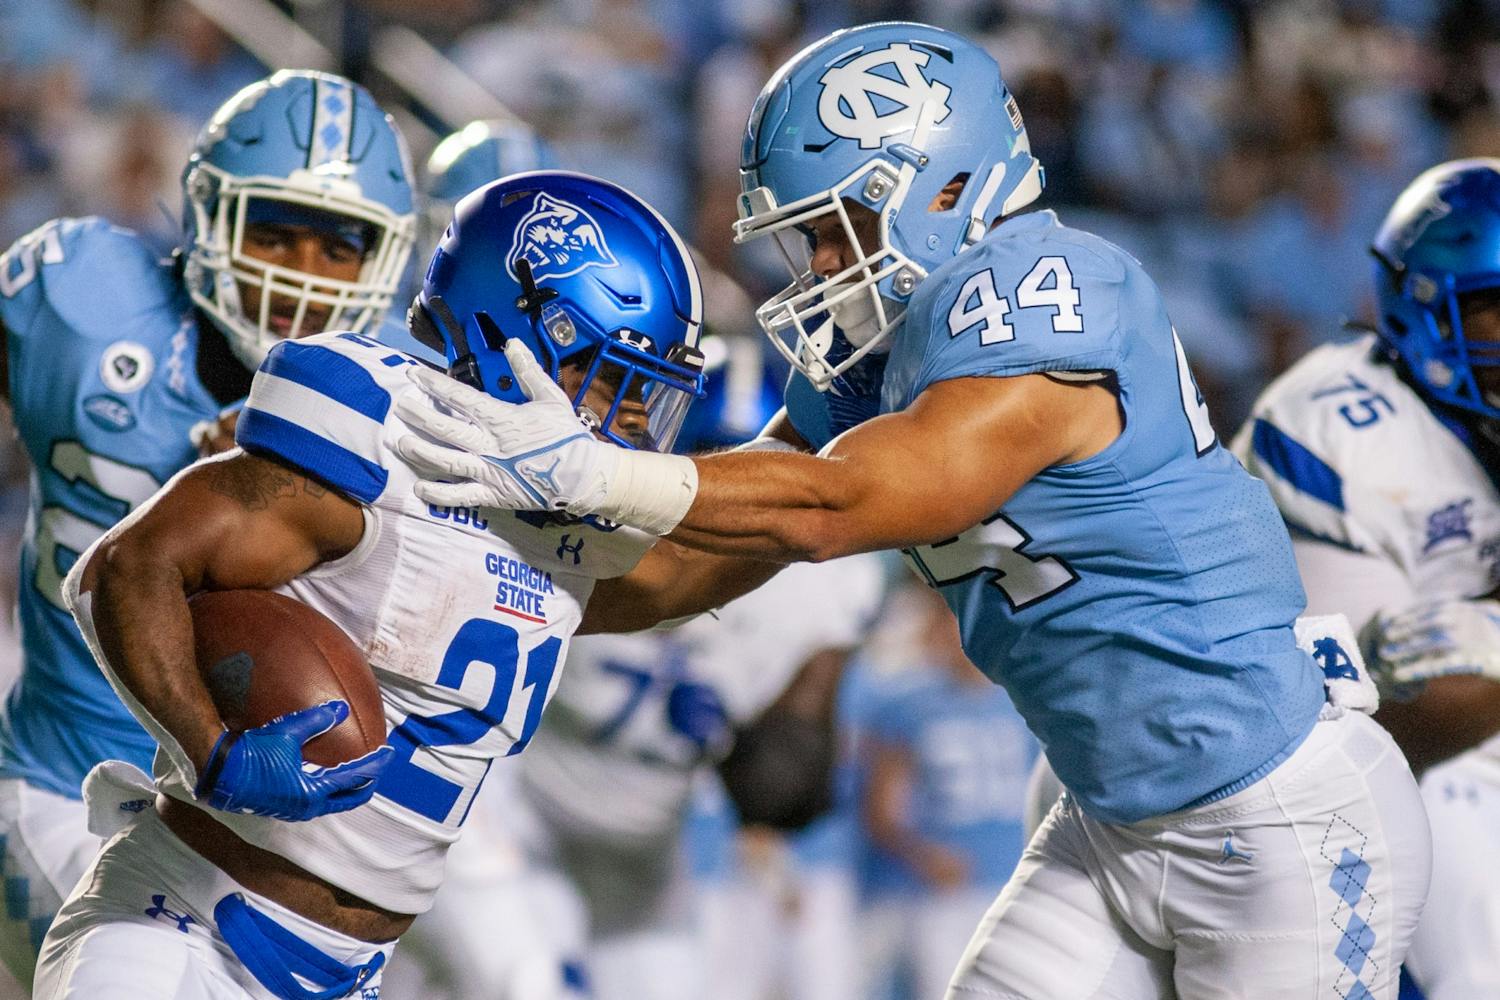 UNC football defeats Georgia State 59-17 in home opener